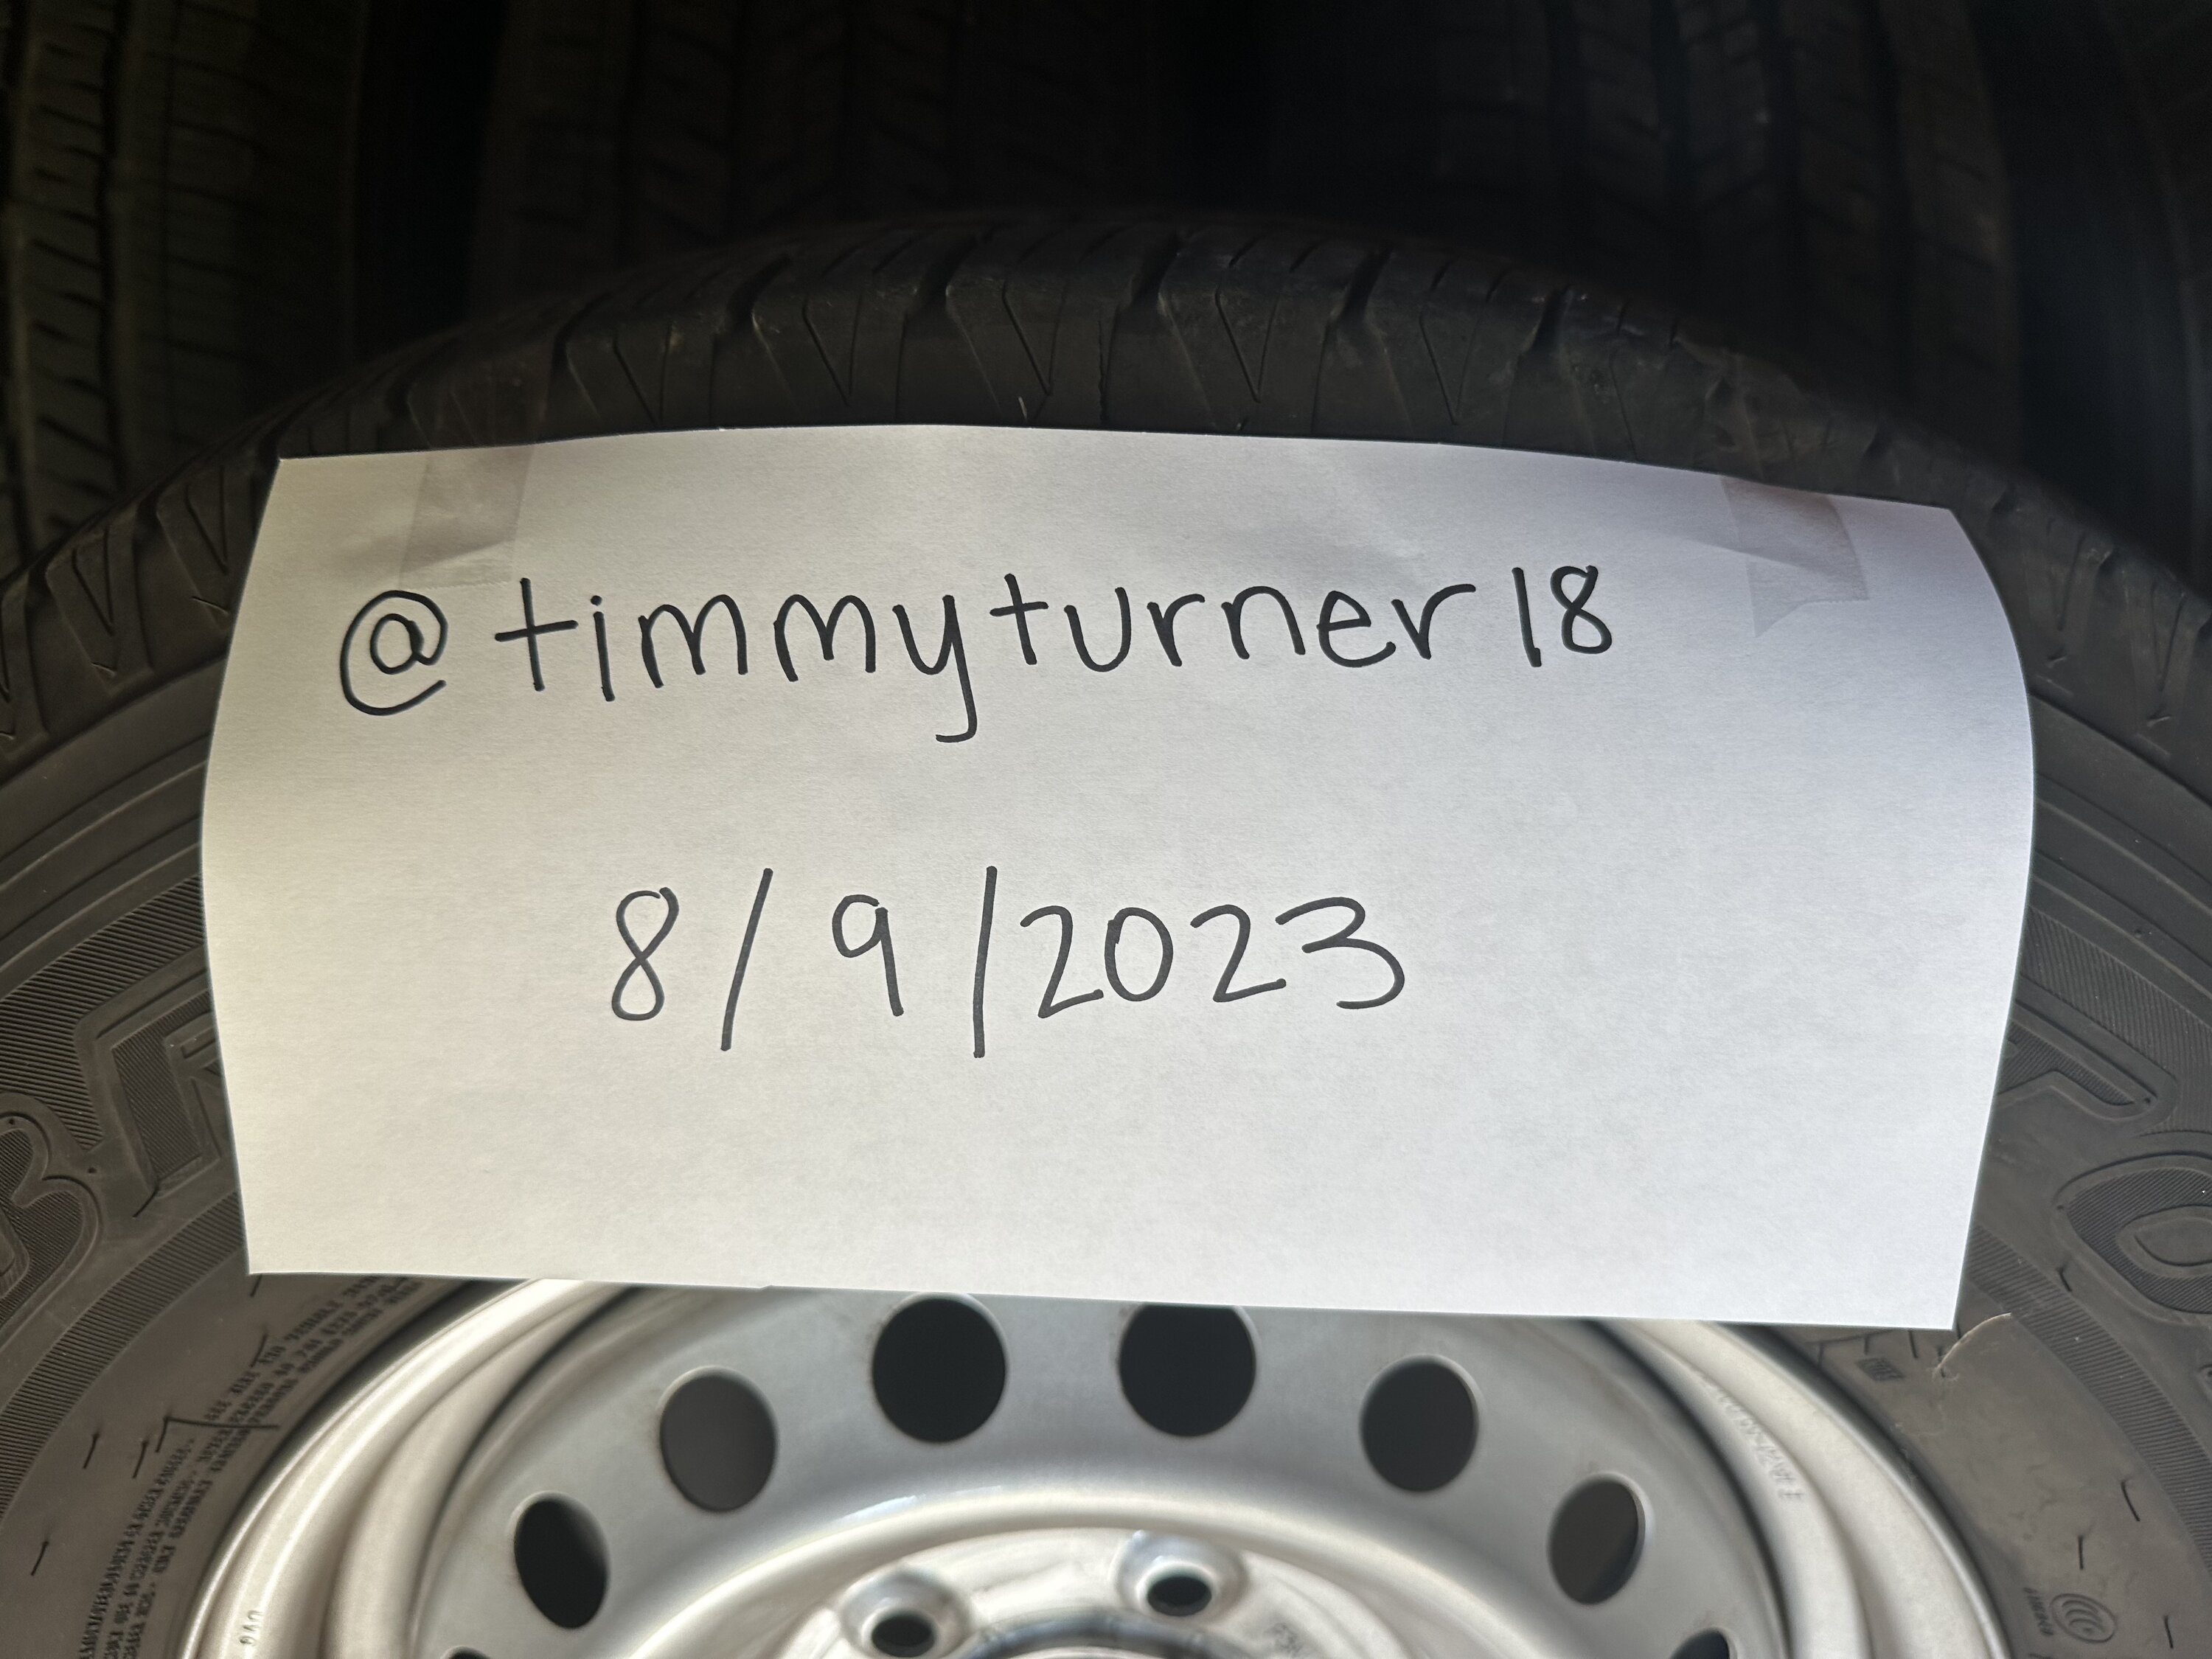 Ford Bronco *PRICE DROP* 5 Base Steelies for $100 with TPMS included - DMV AREA PICKUP IMG_6603